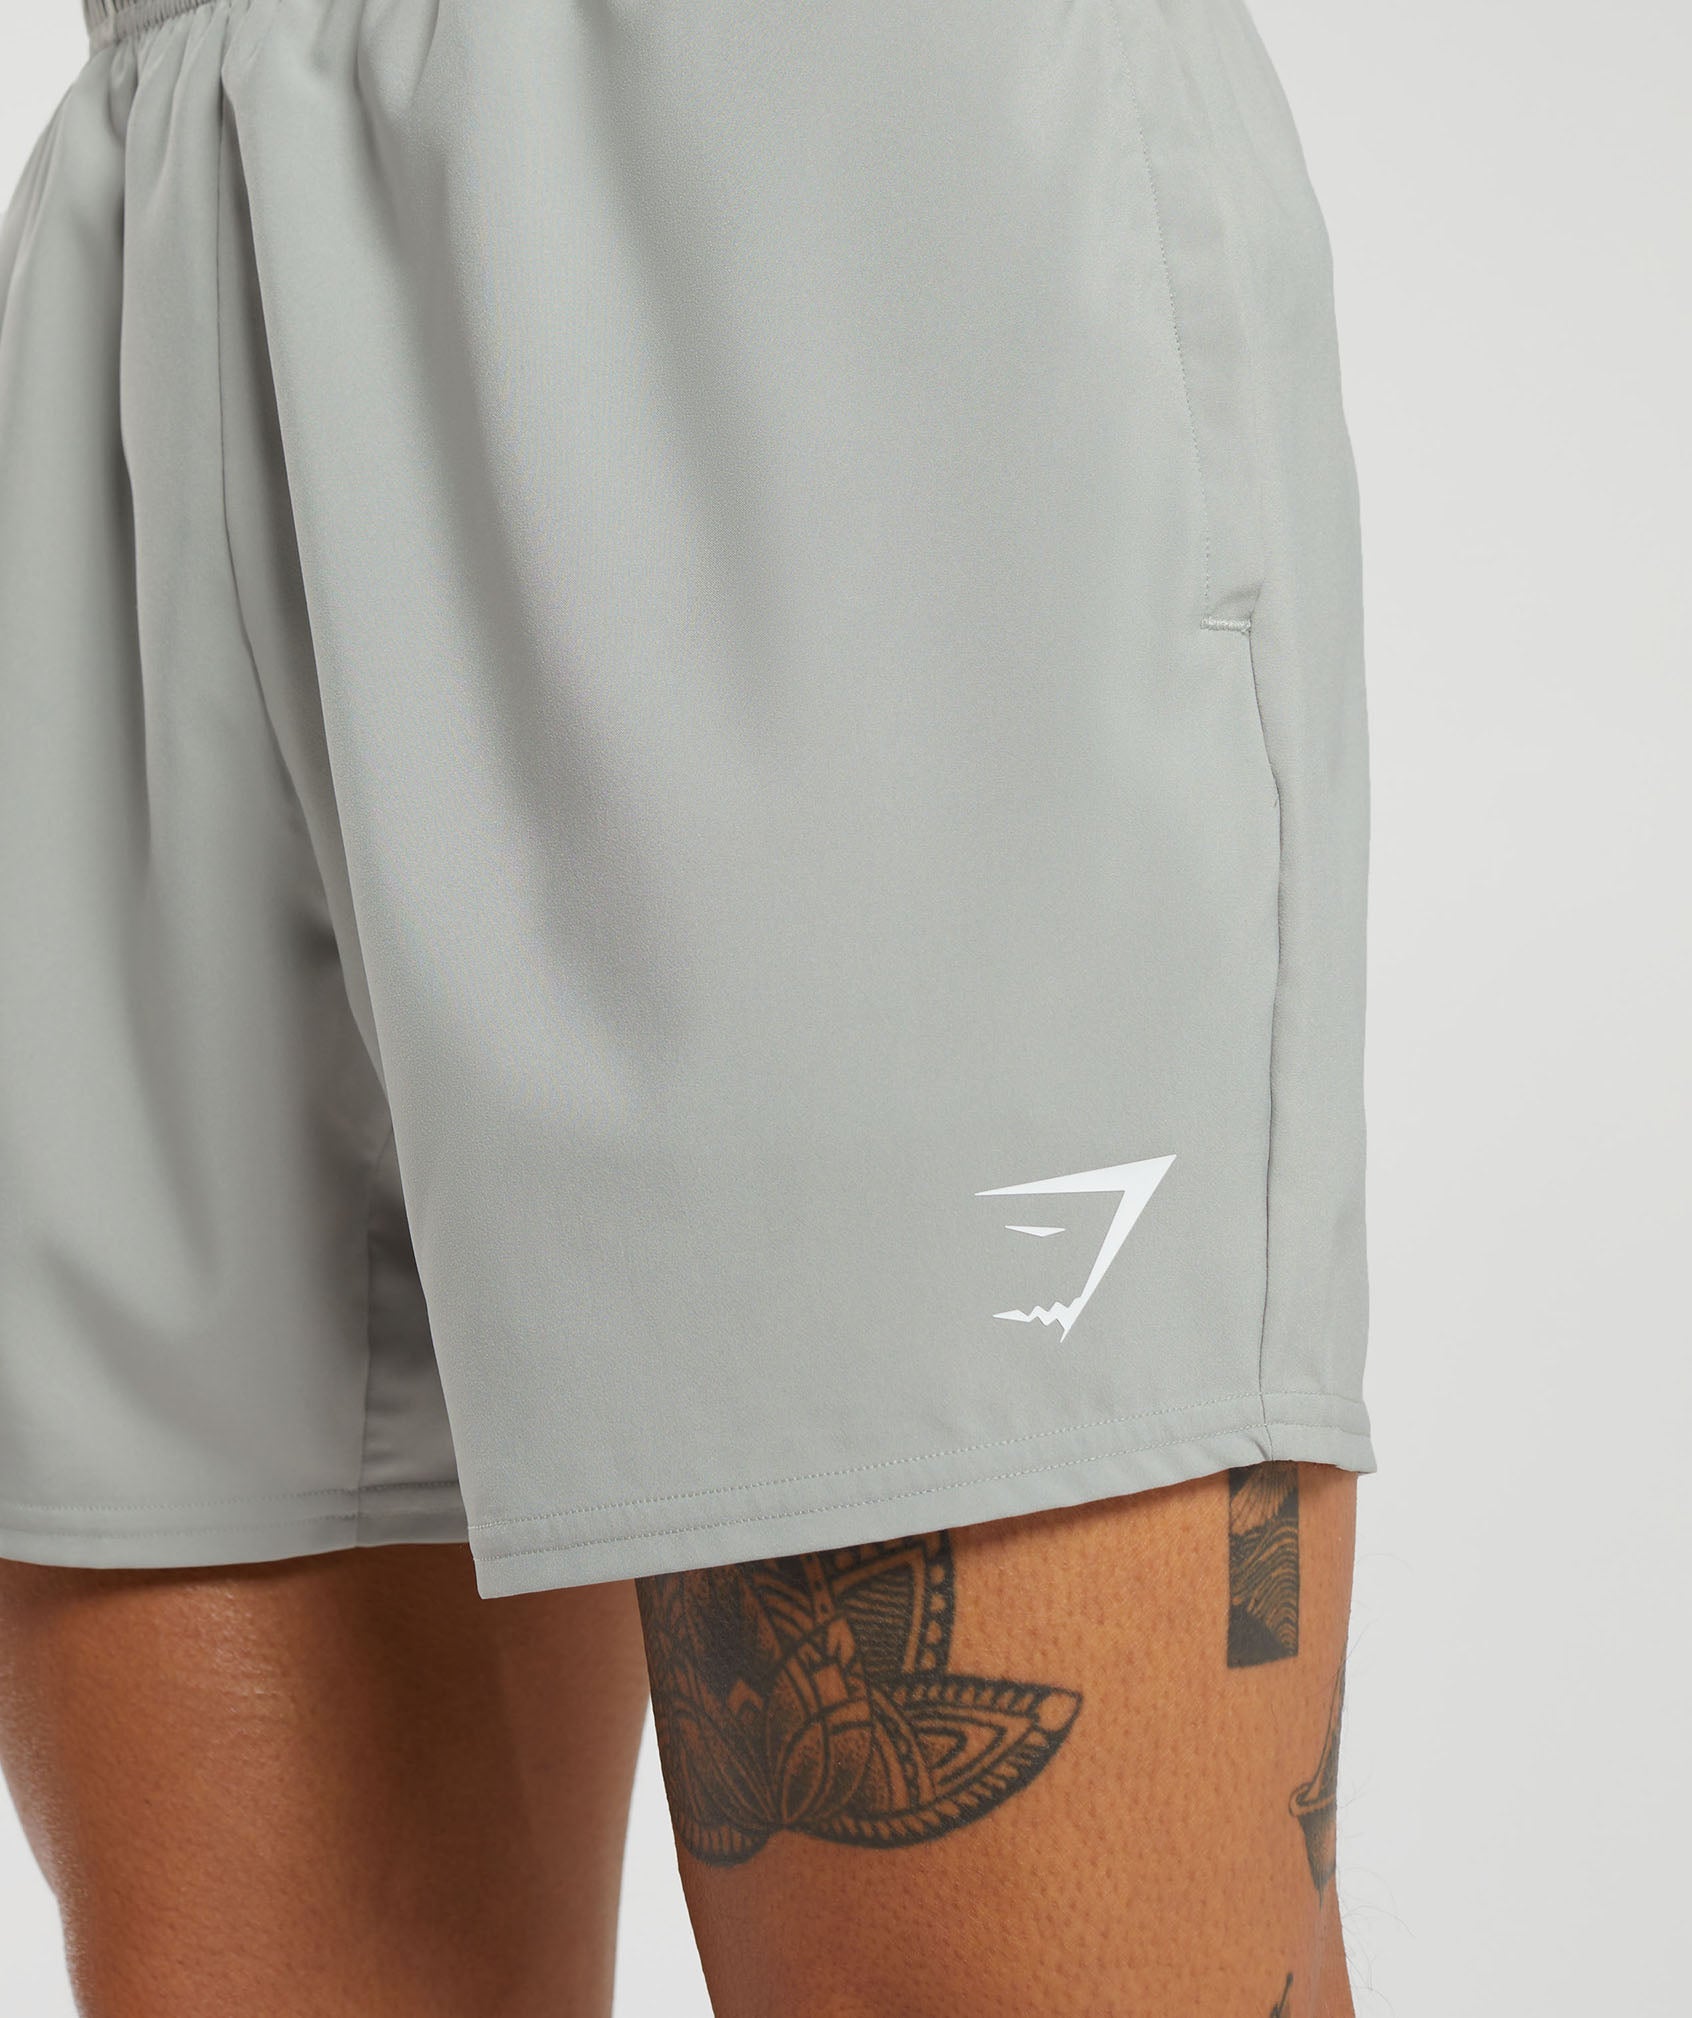 Arrival 5" Shorts in Stone Grey - view 5